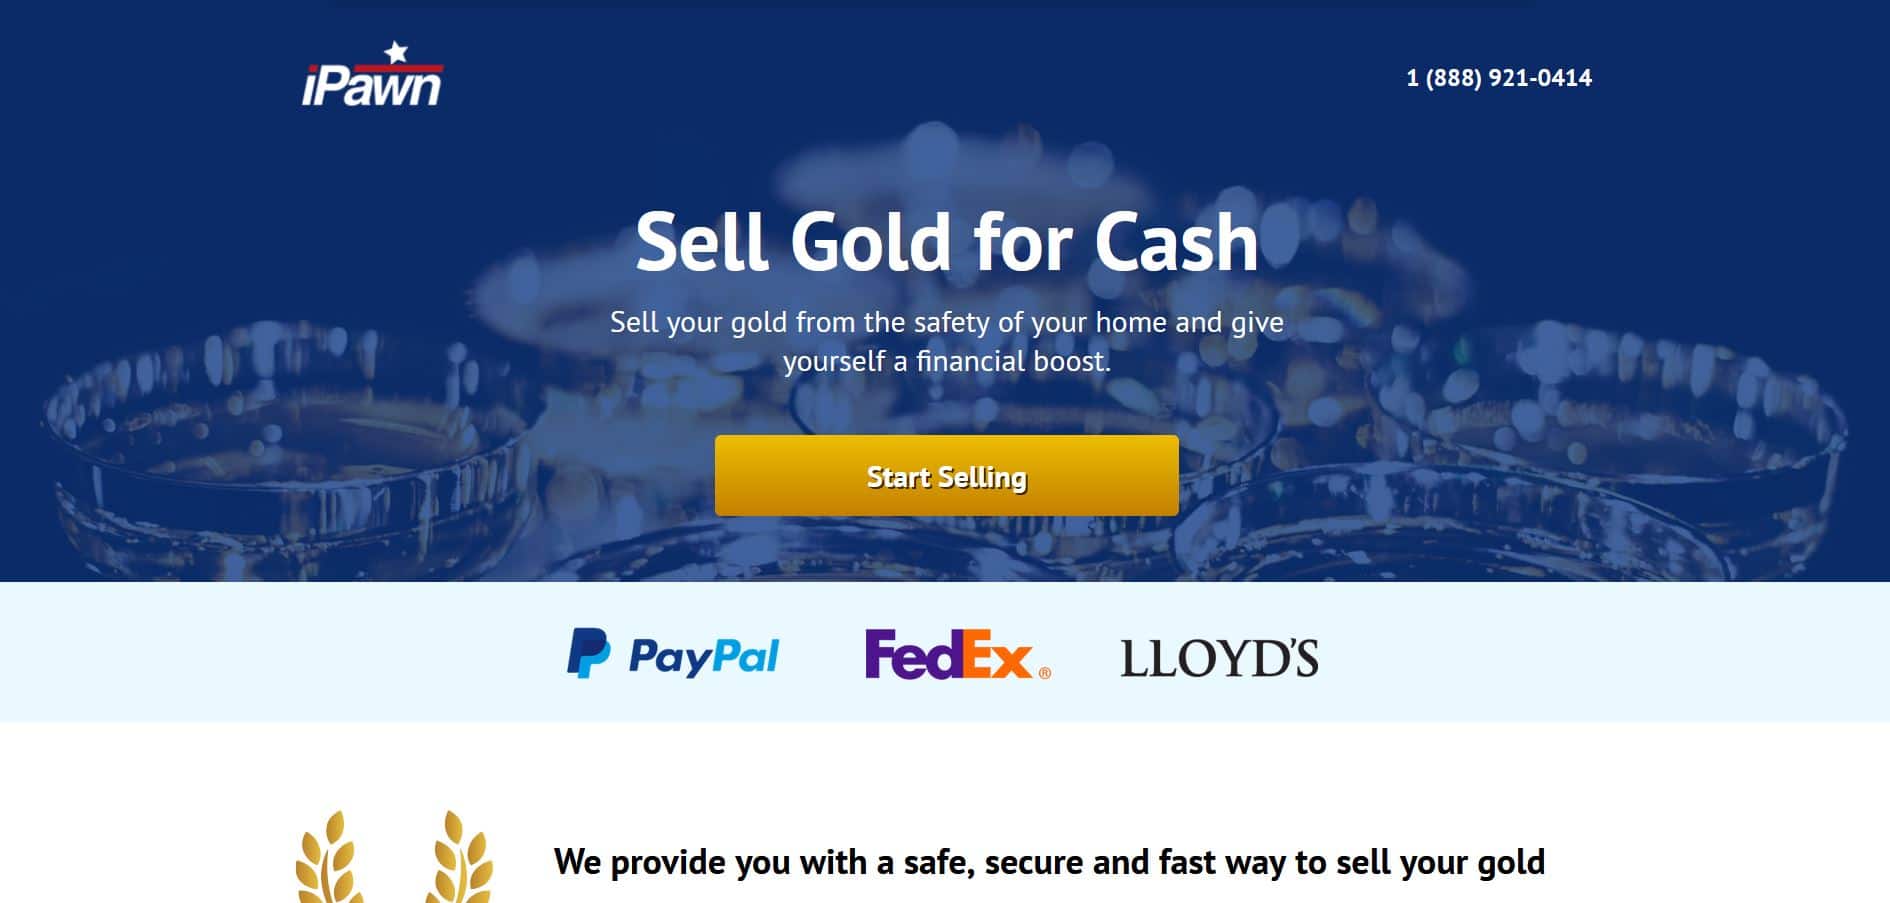 It's Time to Sell Your Gold and Buy Silver - Global Bullion Suppliers